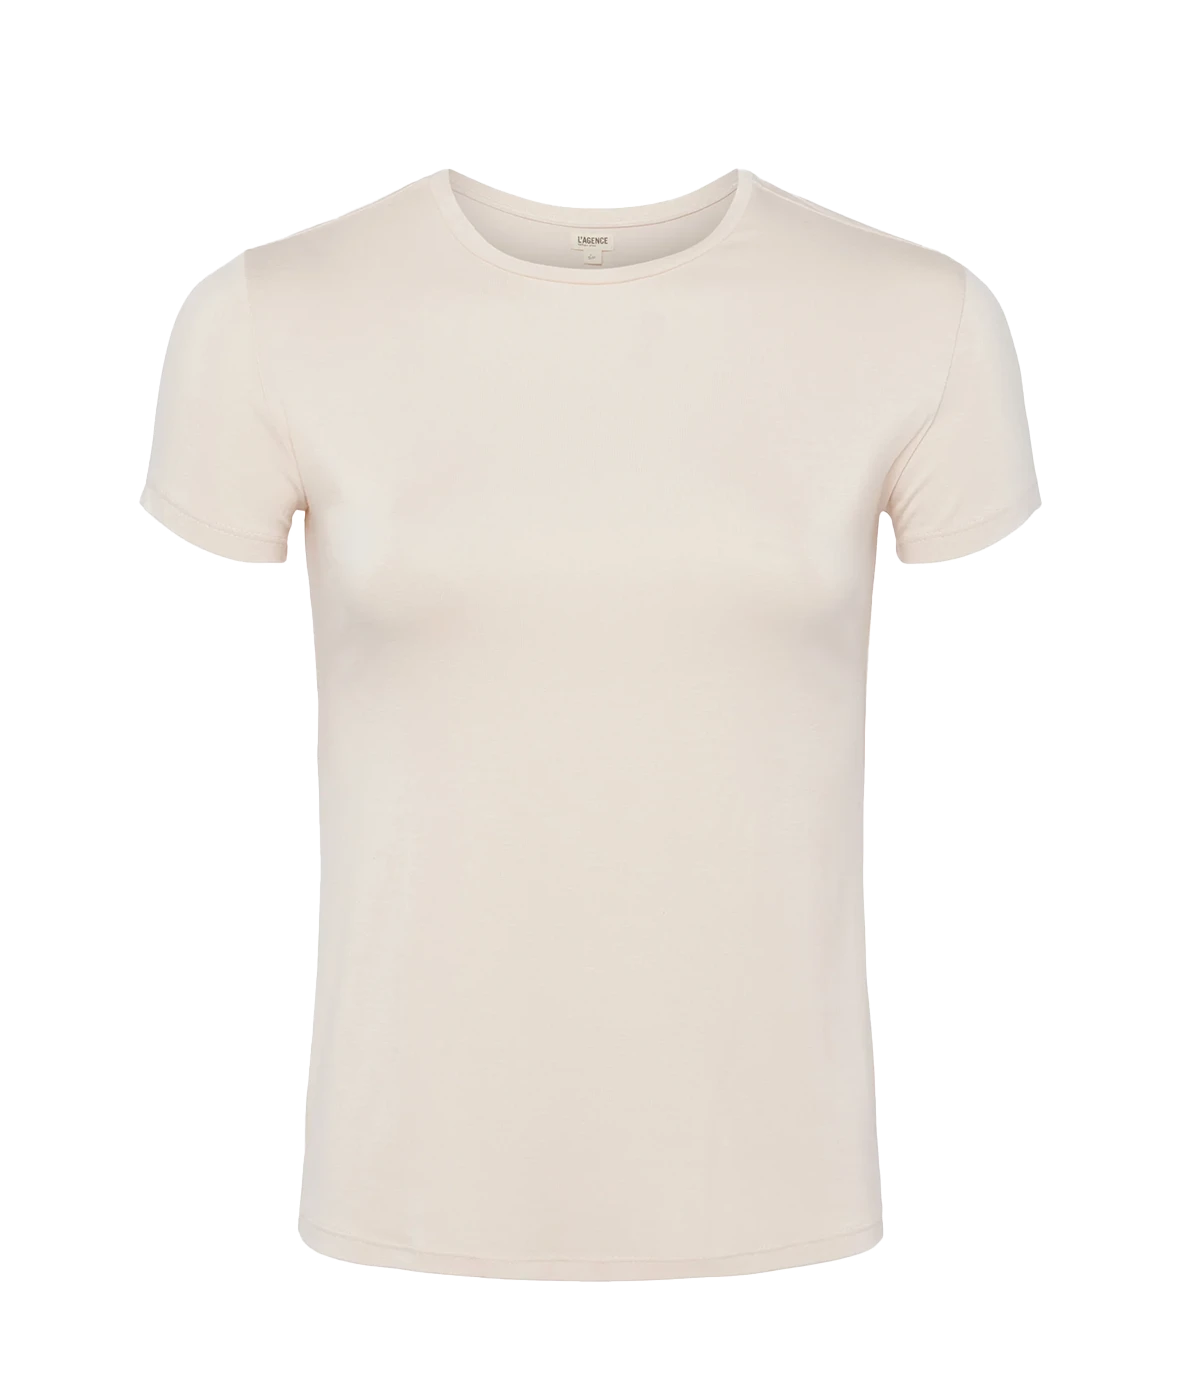 fitted crewneck t-shirt by l'agence with short sleeves. Wash and wear, bra friendly top